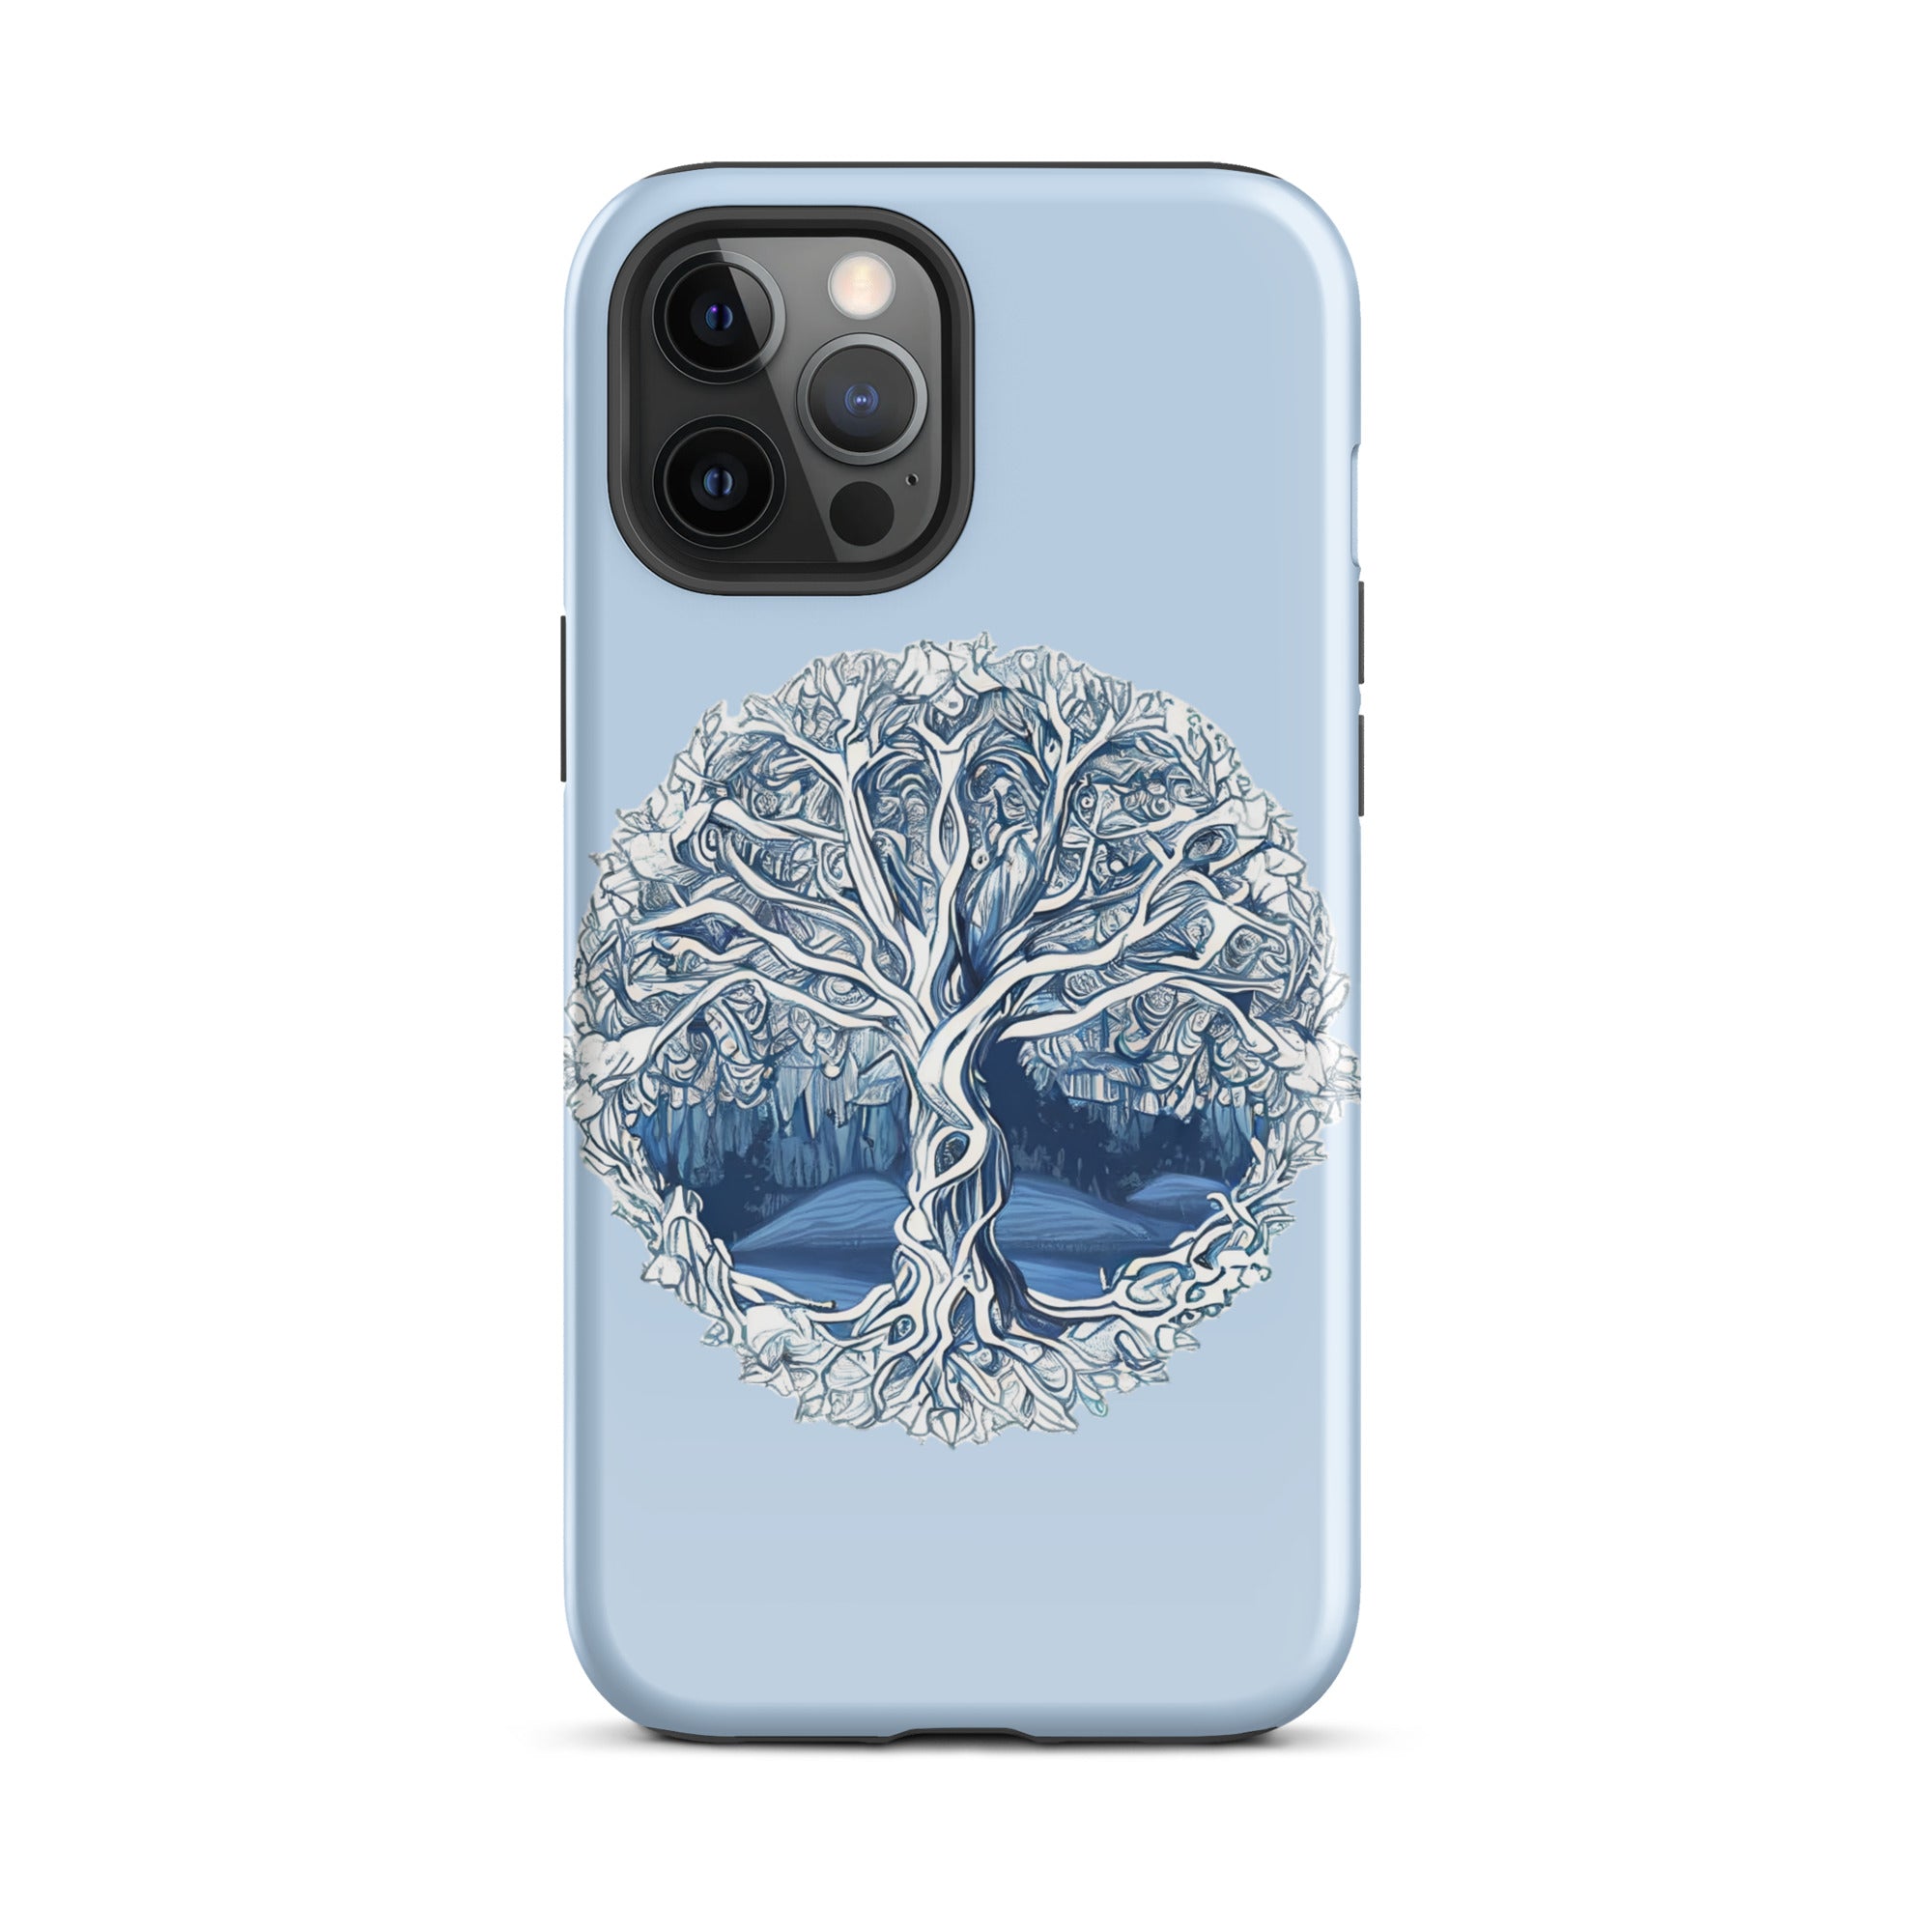 tough-case-for-iphone-glossy-iphone-12-pro-max-front-656e0a3712c87.jpg